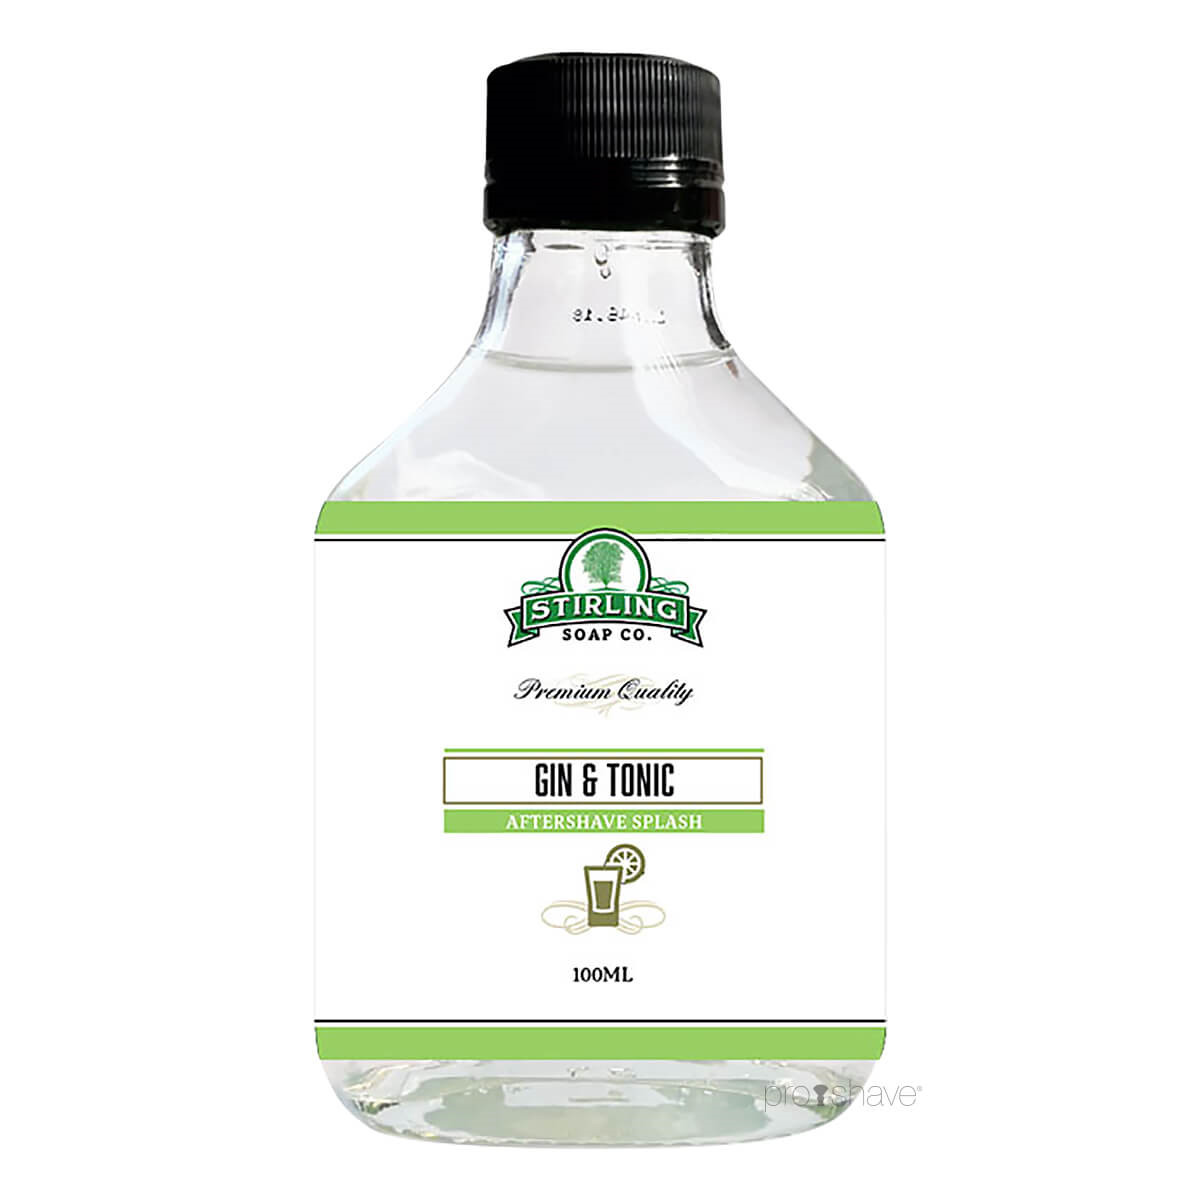 Stirling Soap Co. Aftershave Splash, Gin & Tonic on the Rocks, 100 ml.